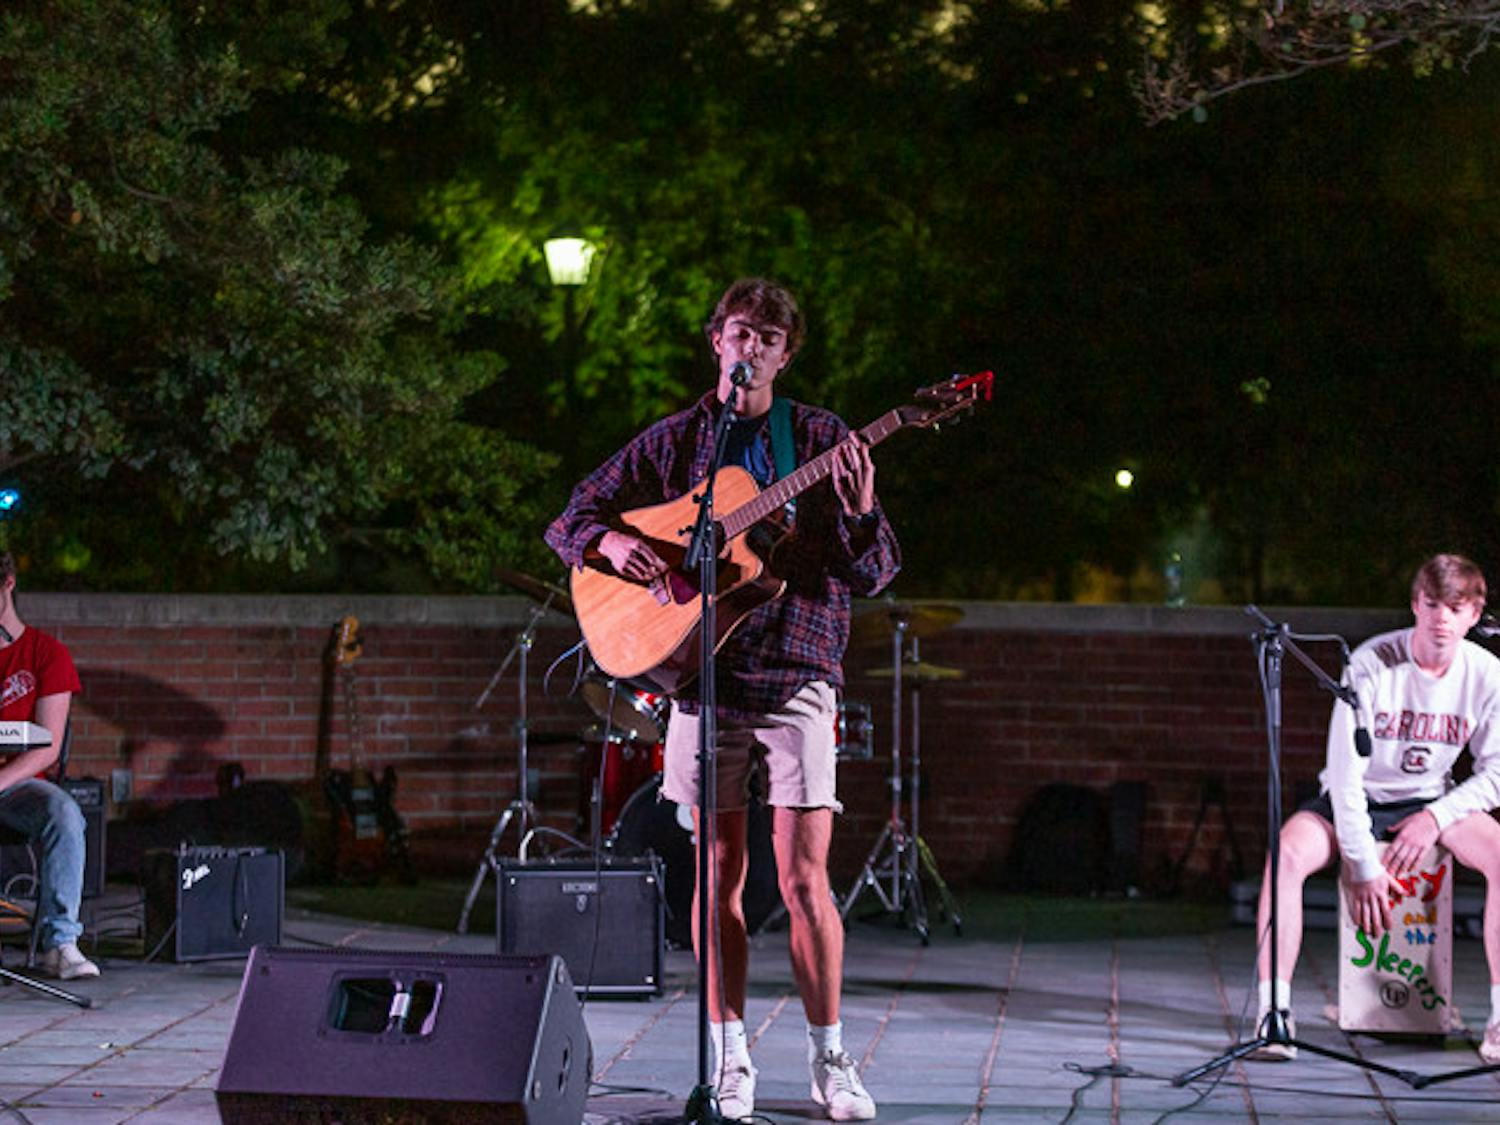 Henry and the Sleepers perform its set during the UofSC Battle of the Bands on Oct. 5, 2022. The band consists of second-year computer science student Wyatt Carhart (left), second-year media arts student Henry Wood (center) and second-year operations and supply chain student Sean Wright (right).